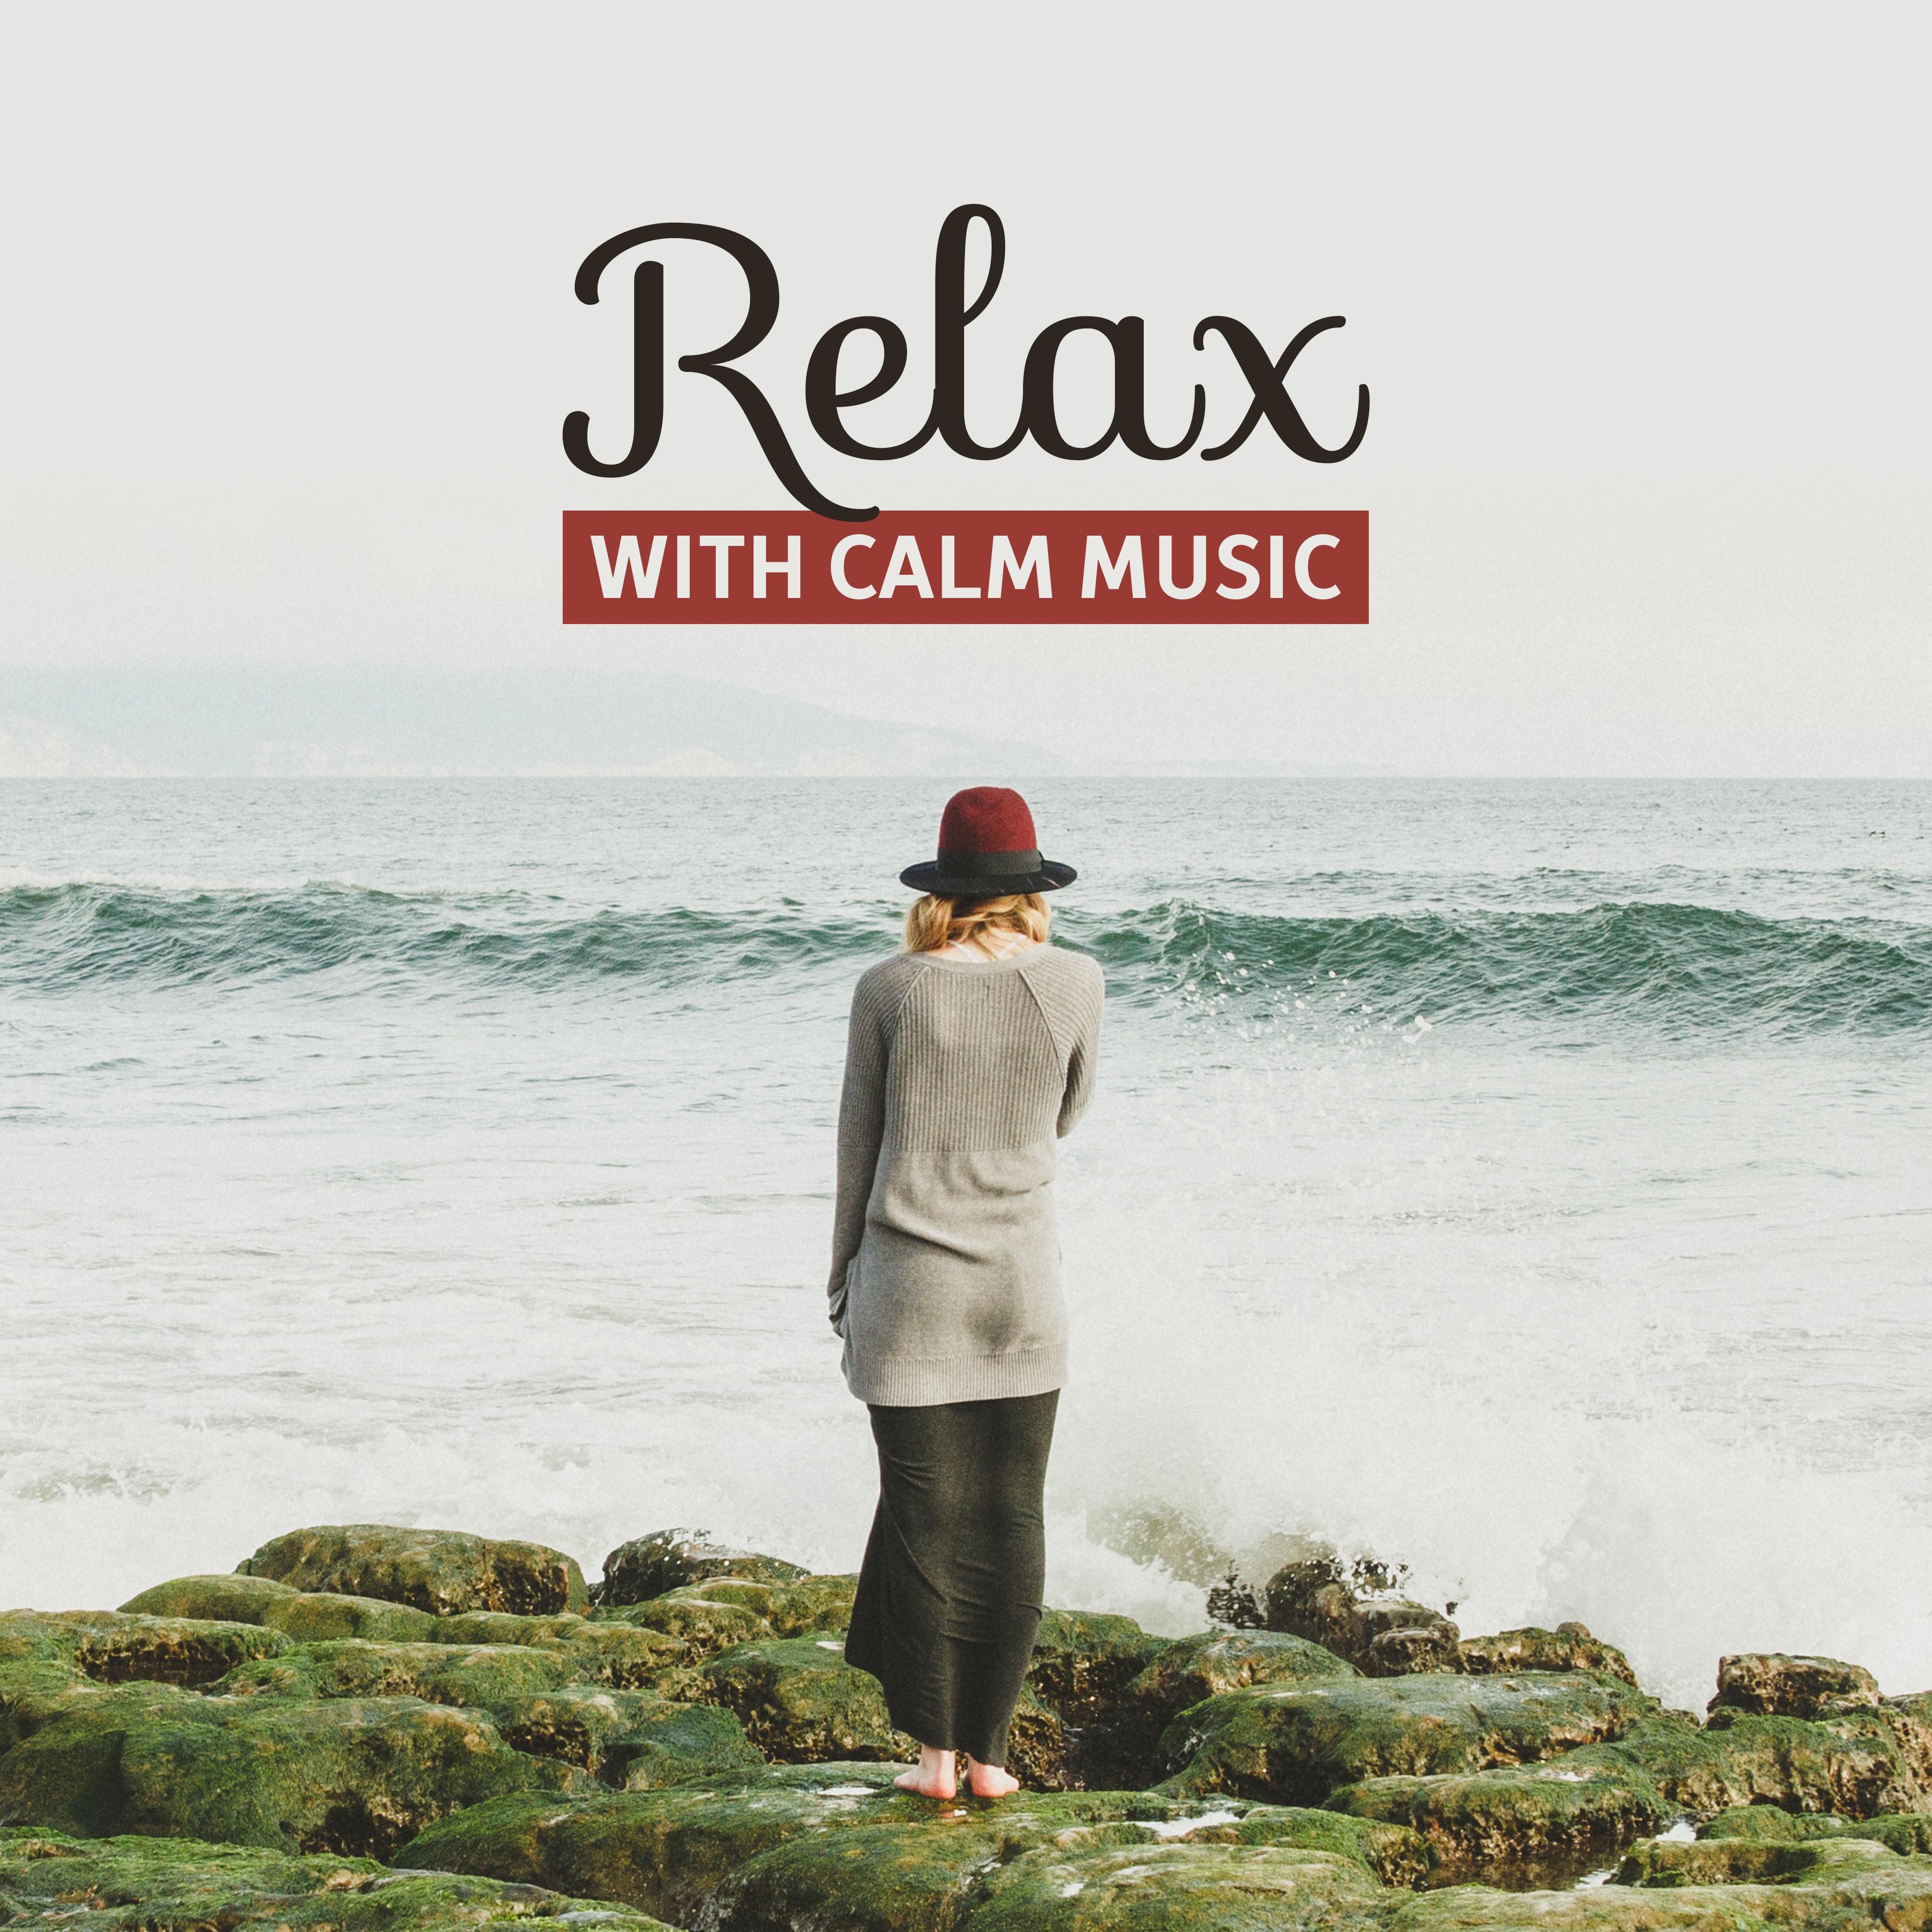 Relax with Calm Music – Soothing Waves of Calmness, Easy Listening, Stress Relief, Peaceful Music